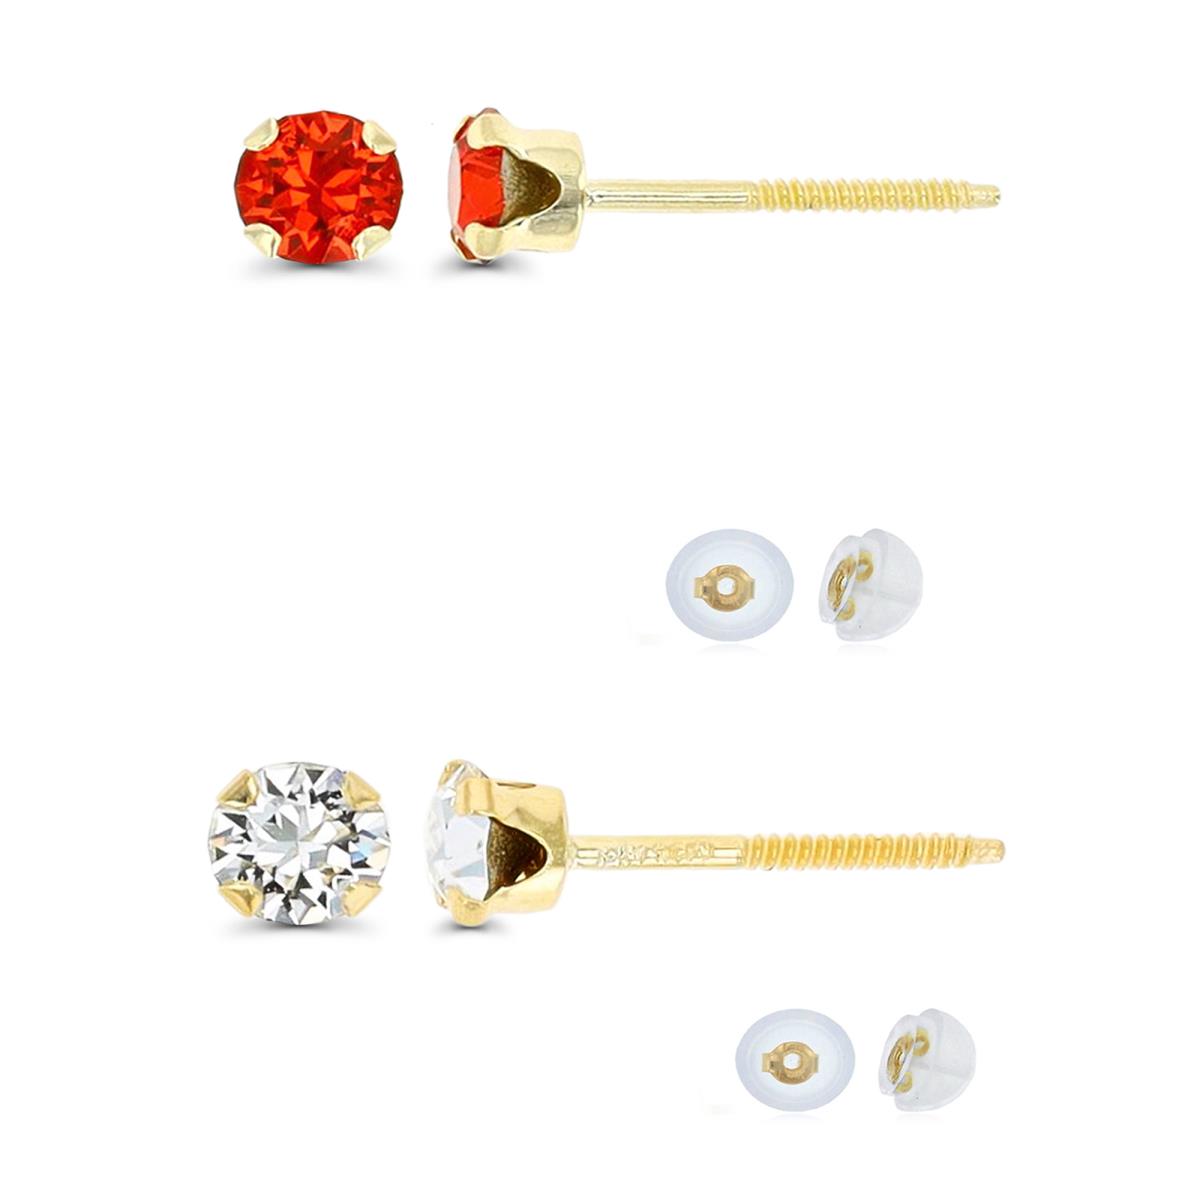 14K Yellow Gold 3mm Rd Garnet Crystal & White Crystal Solitaire Stud Earring Set